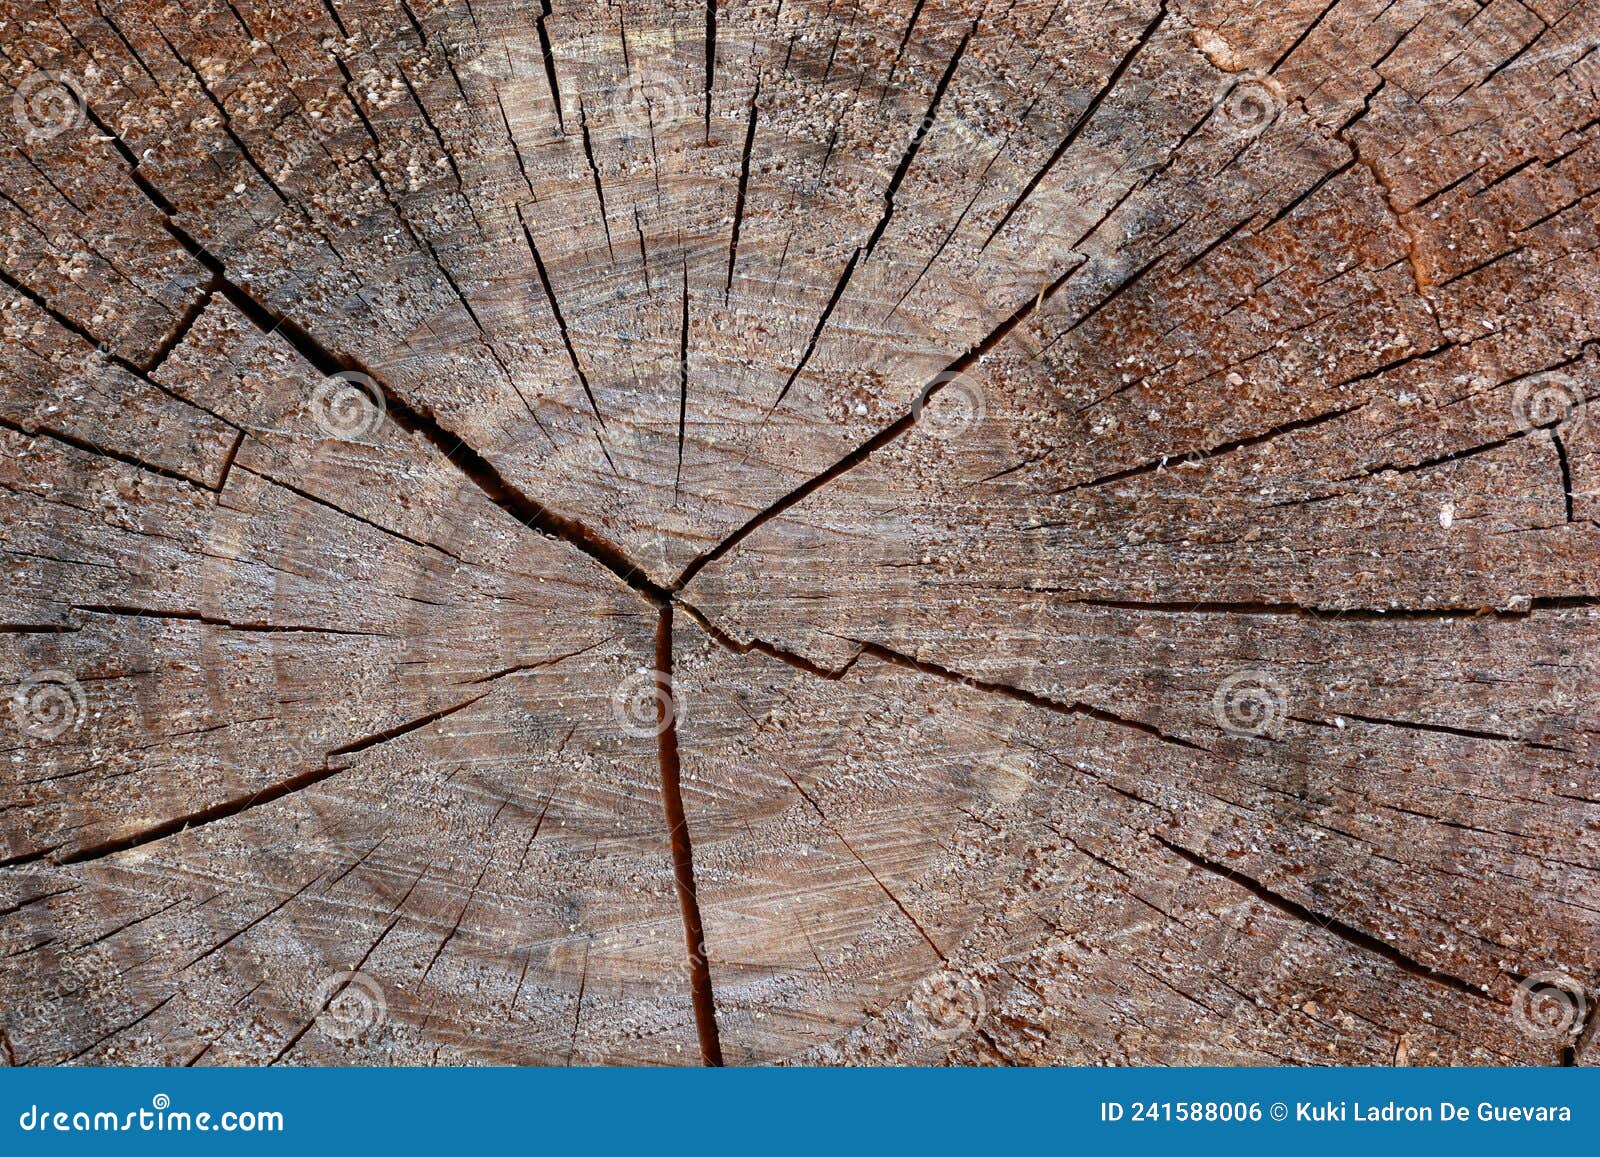 detail of the trunk of an old tree, texture